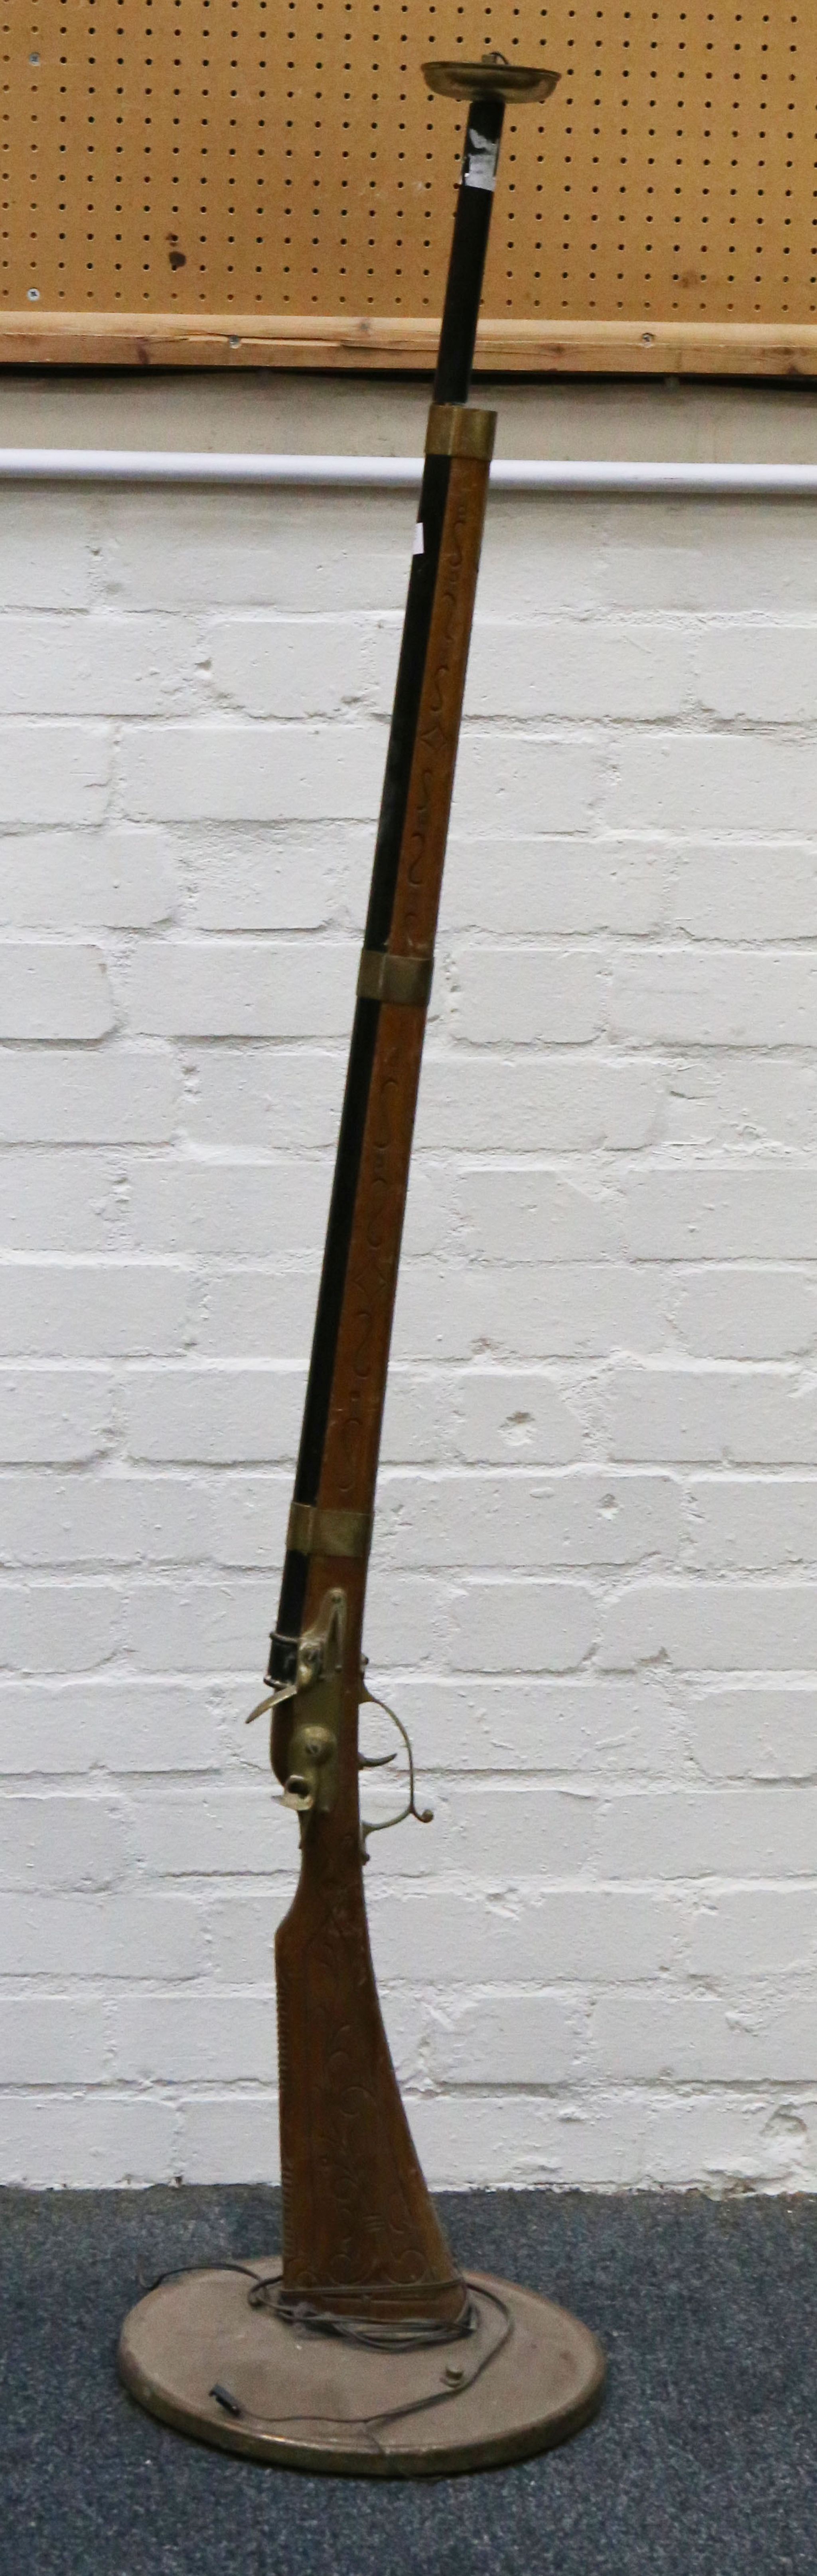 A vintage standard lamp, in rifle form.